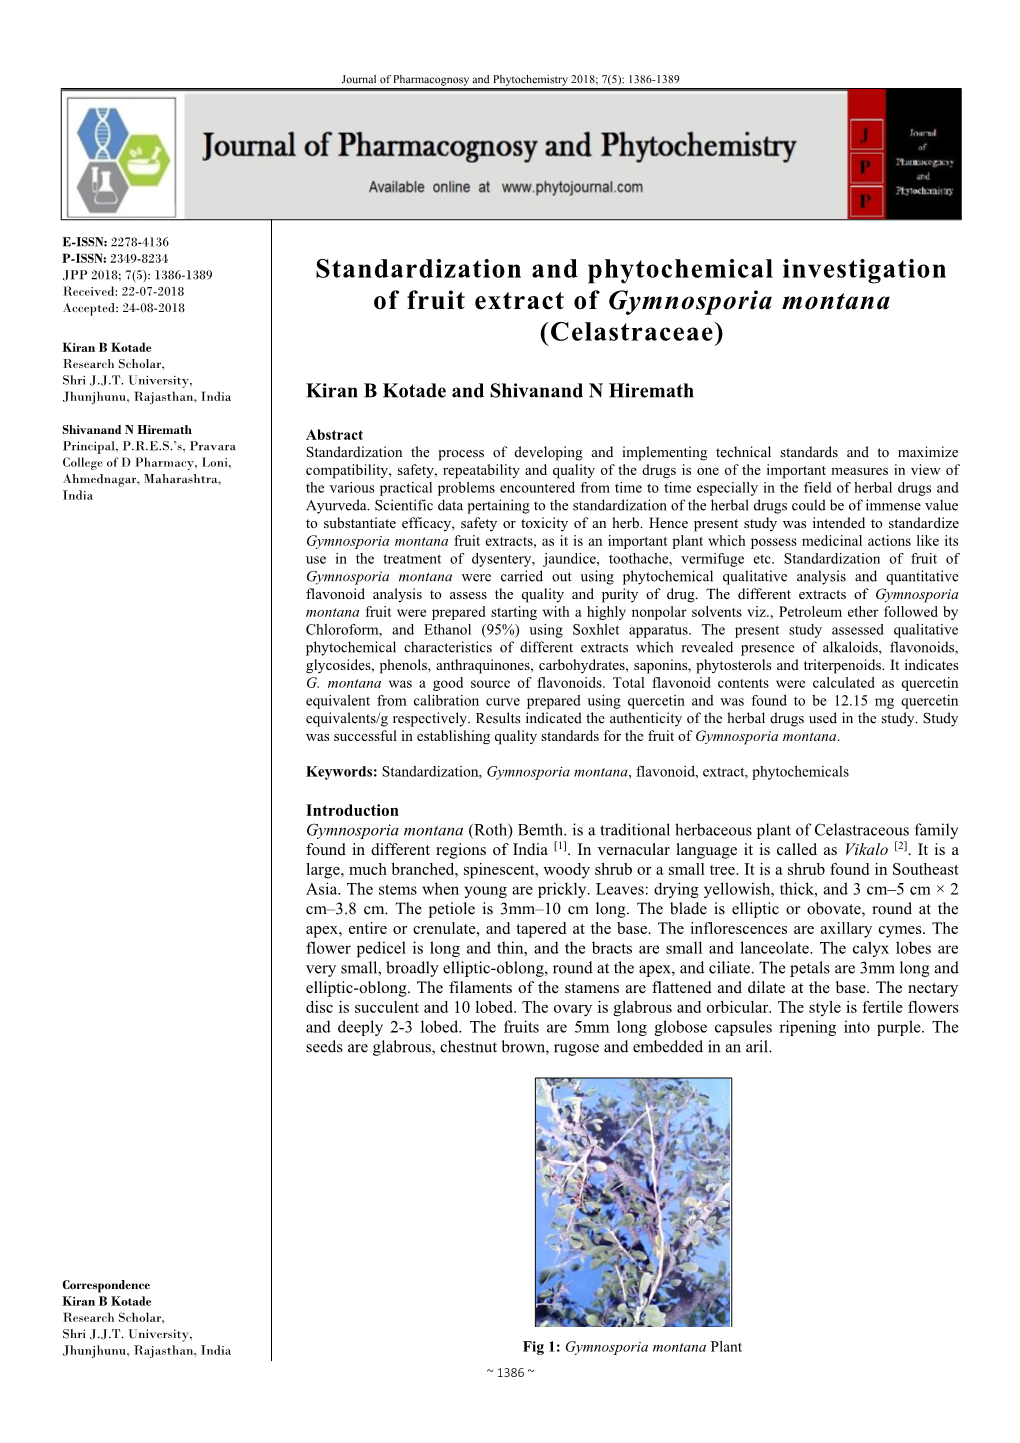 Standardization and Phytochemical Investigation of Fruit Extract of Gymnosporia Montana (Celastraceae)